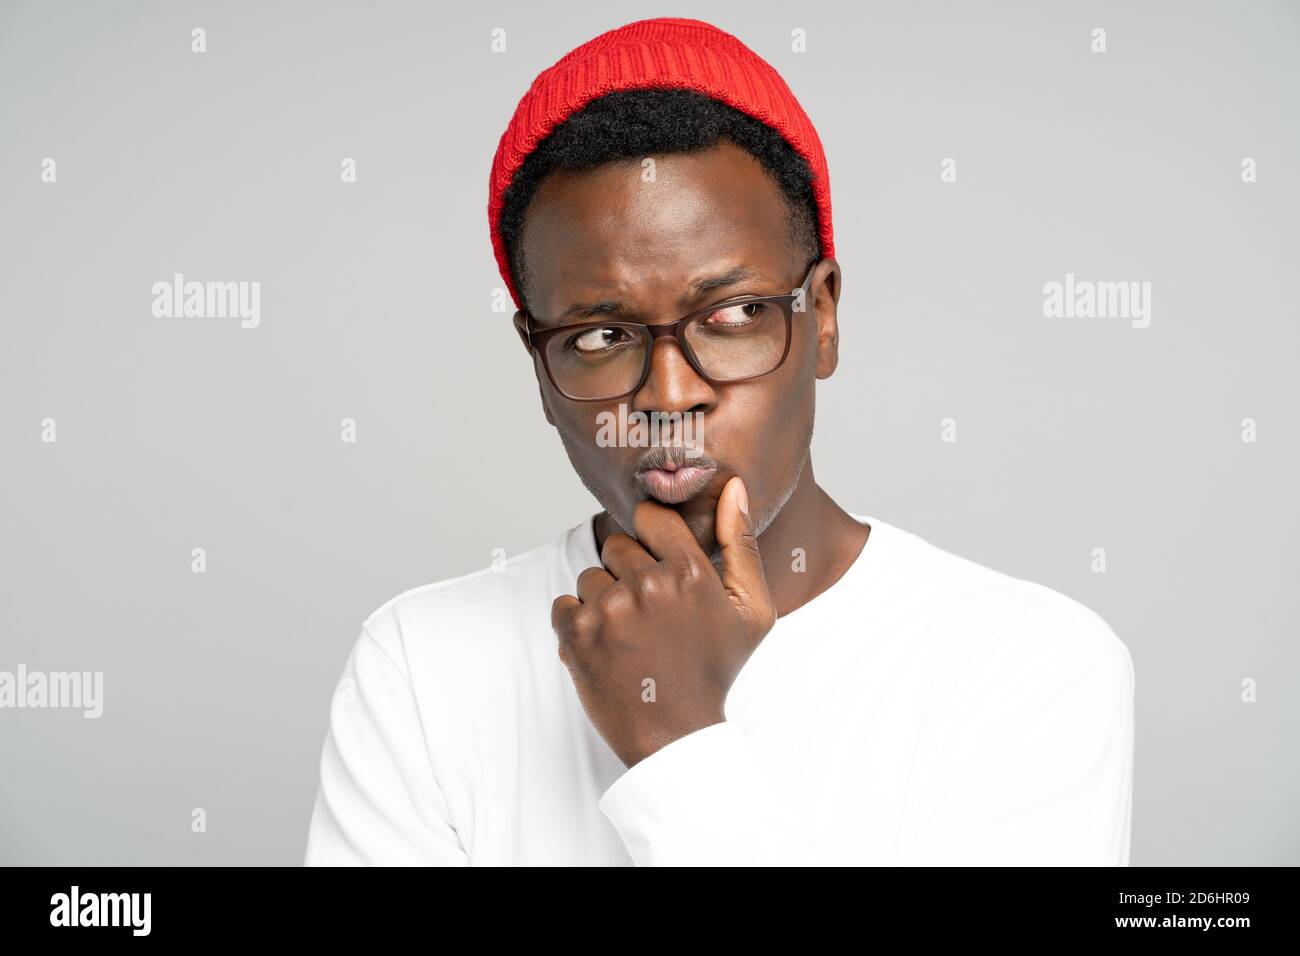 Studio portrait of unsure doubtful Black man in red hat wear glasses holds chin, looking right doubtfully, plans or reconsiders something, feeling hes Stock Photo